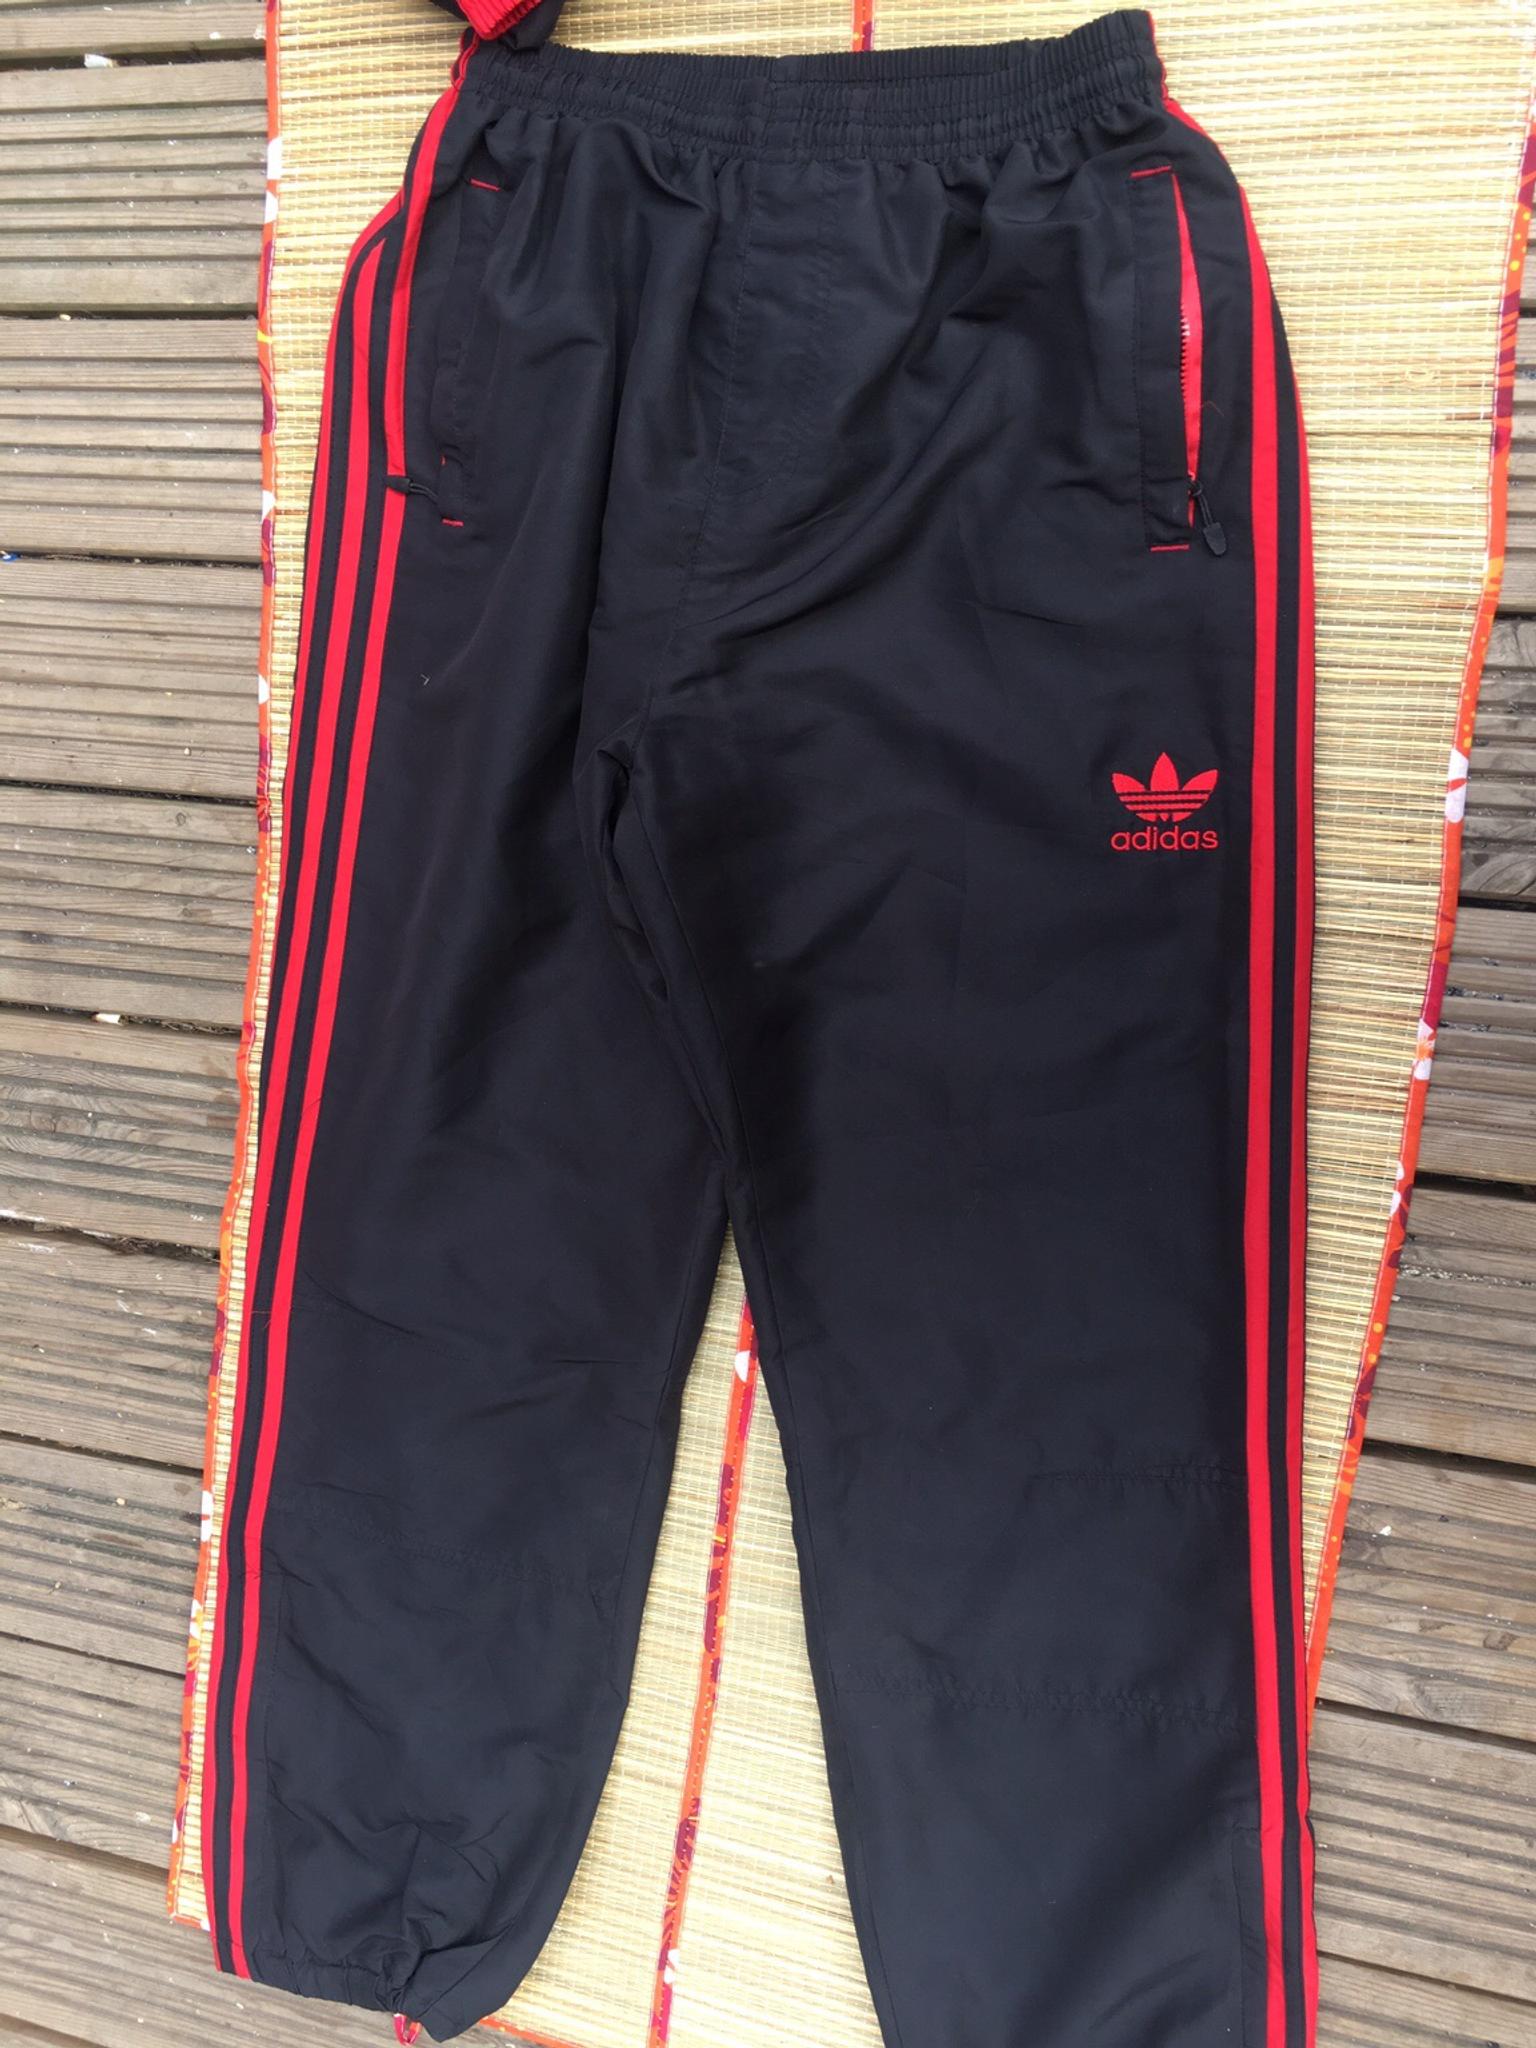 mens black and red adidas tracksuit